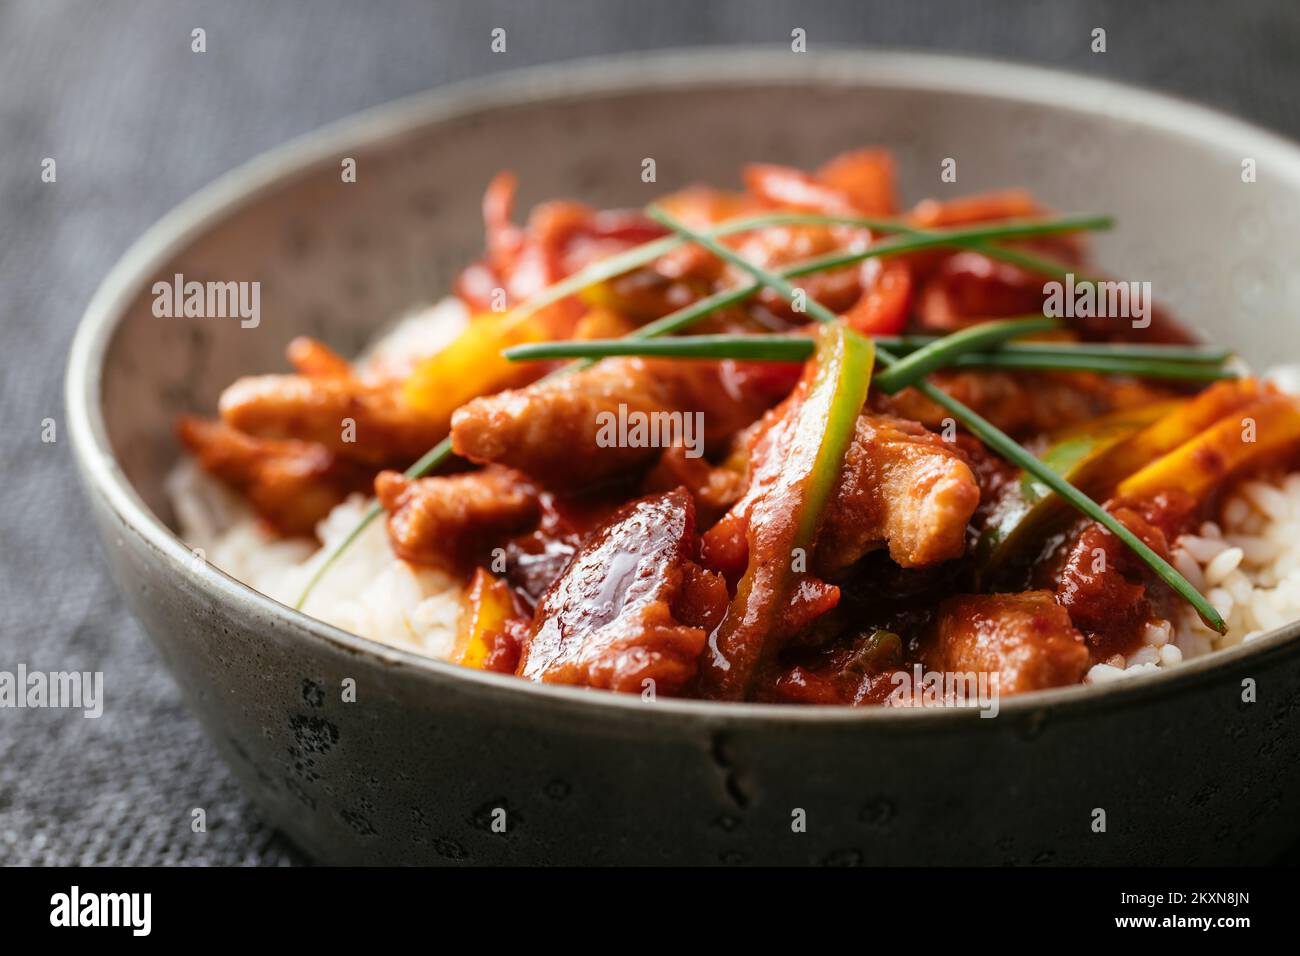 Textured vegetable protein (TVP) with a spicy Chinese plum sauce with bell peppers on rice. Stock Photo